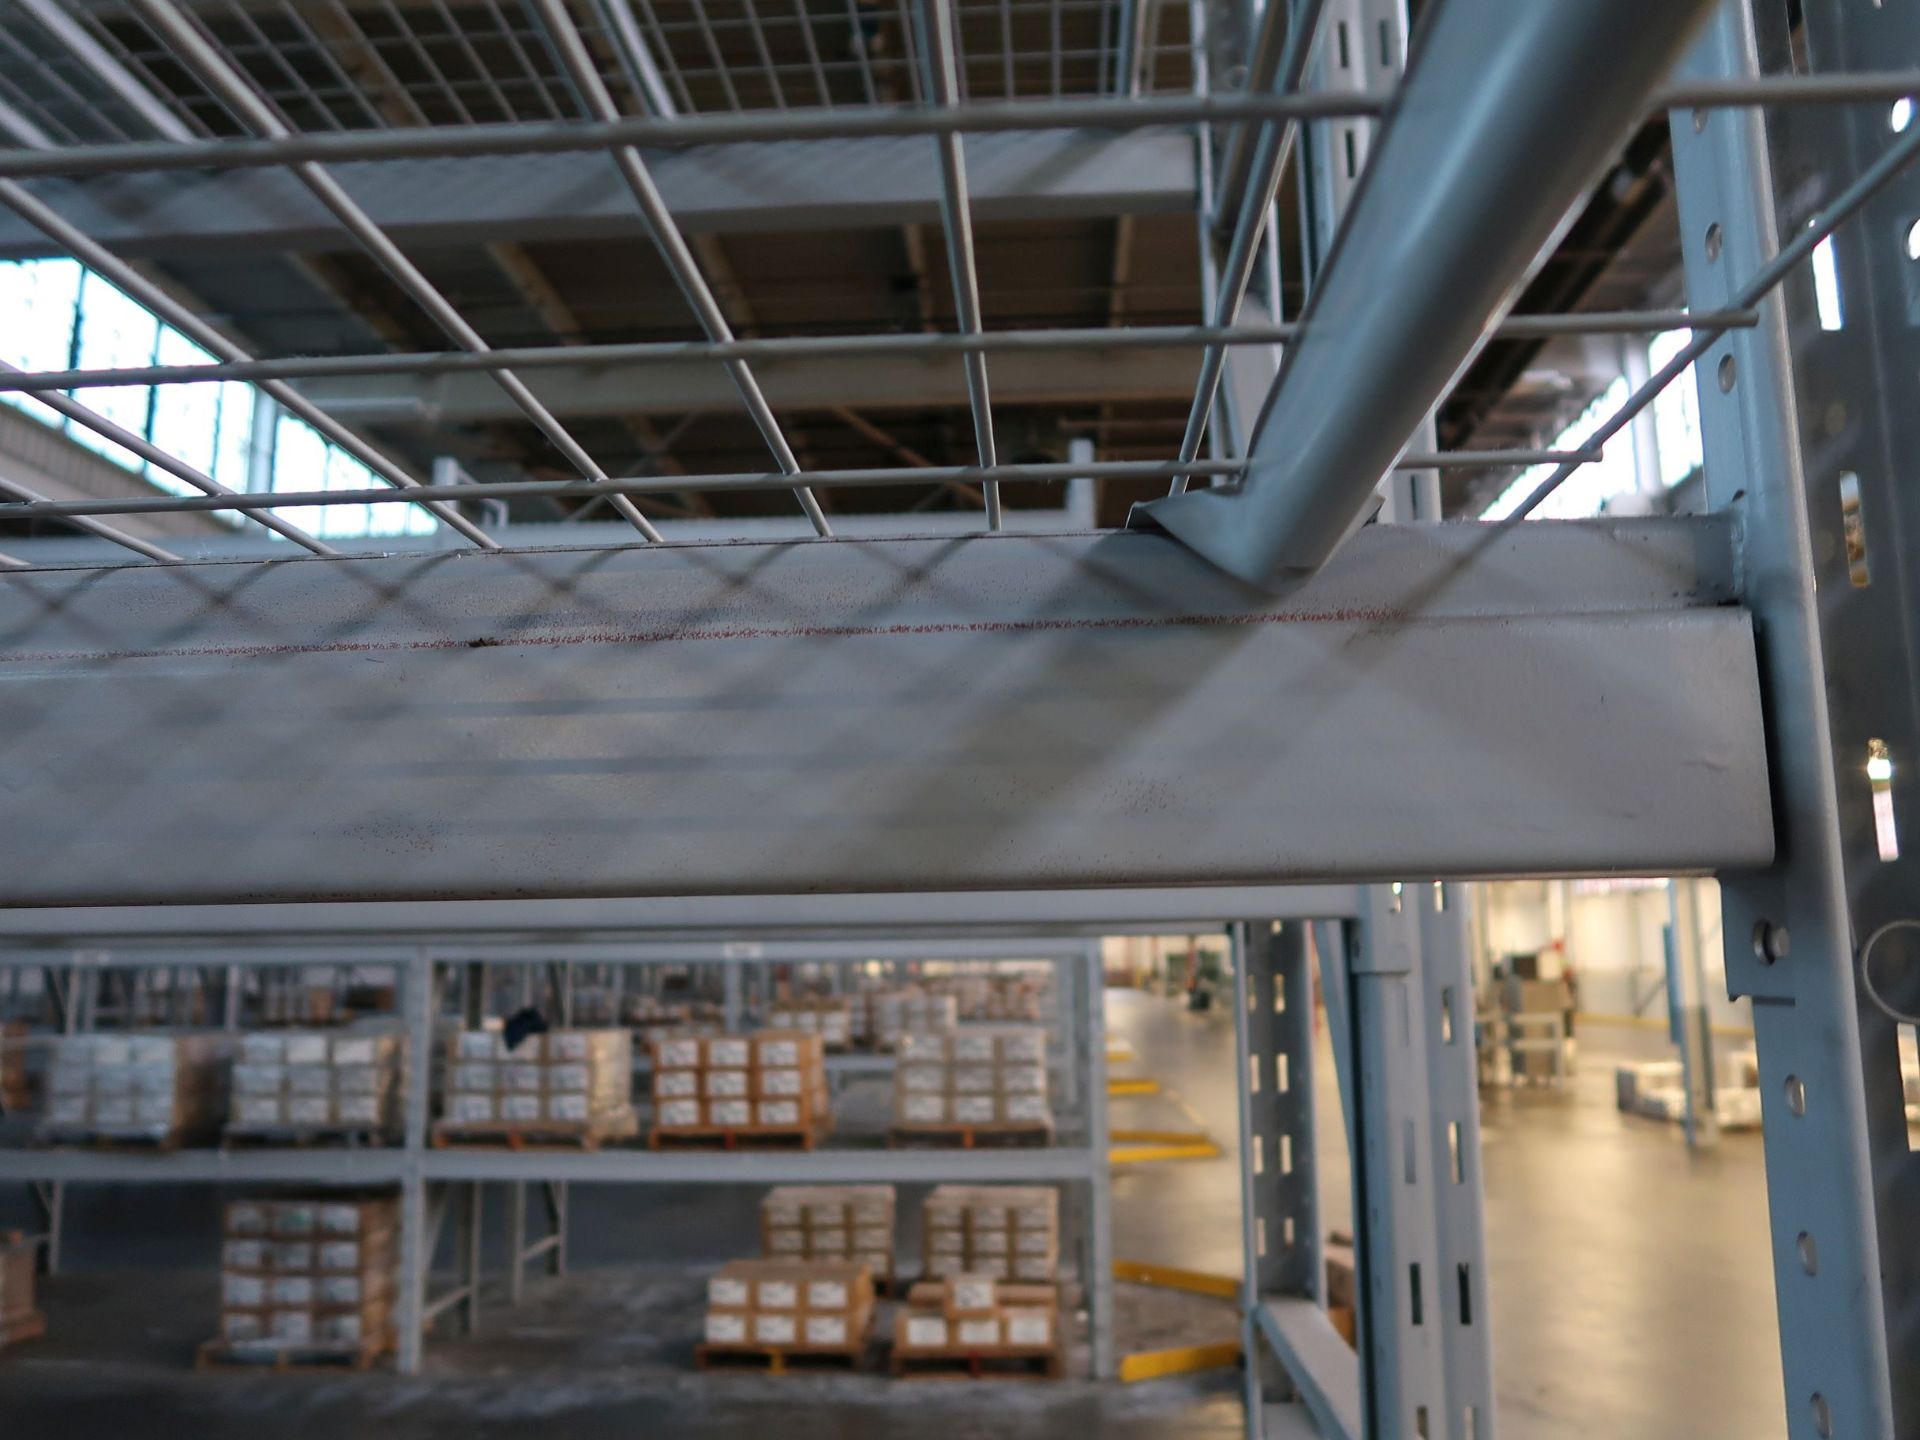 SECTIONS 124" X 32" X 180" NOTCH TYPE ADJUSTABLE BEAM PALLET RACKS WITH (7) 32" X 180" UPRIGHTS, ( - Image 3 of 3